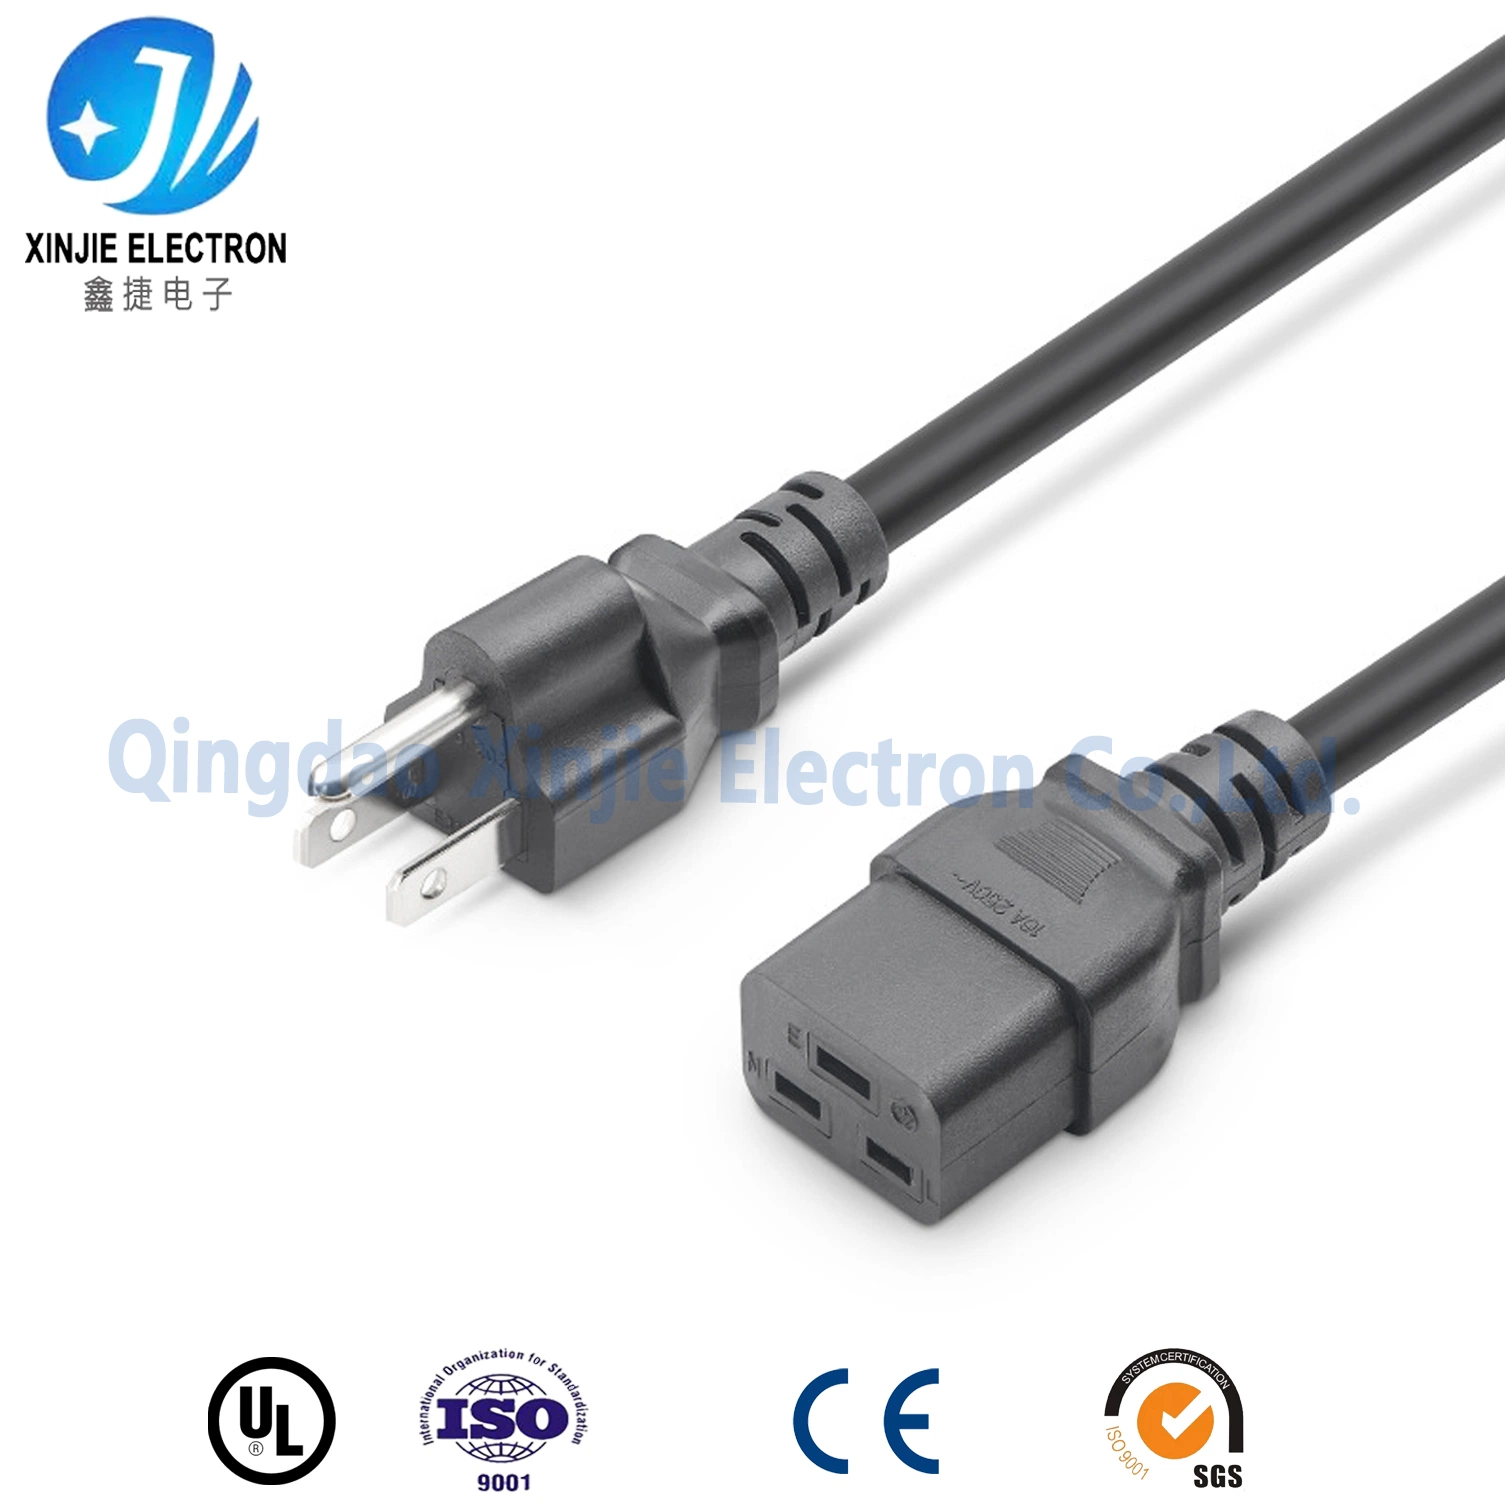 6FT AC Replacement Power Cable in Black Color